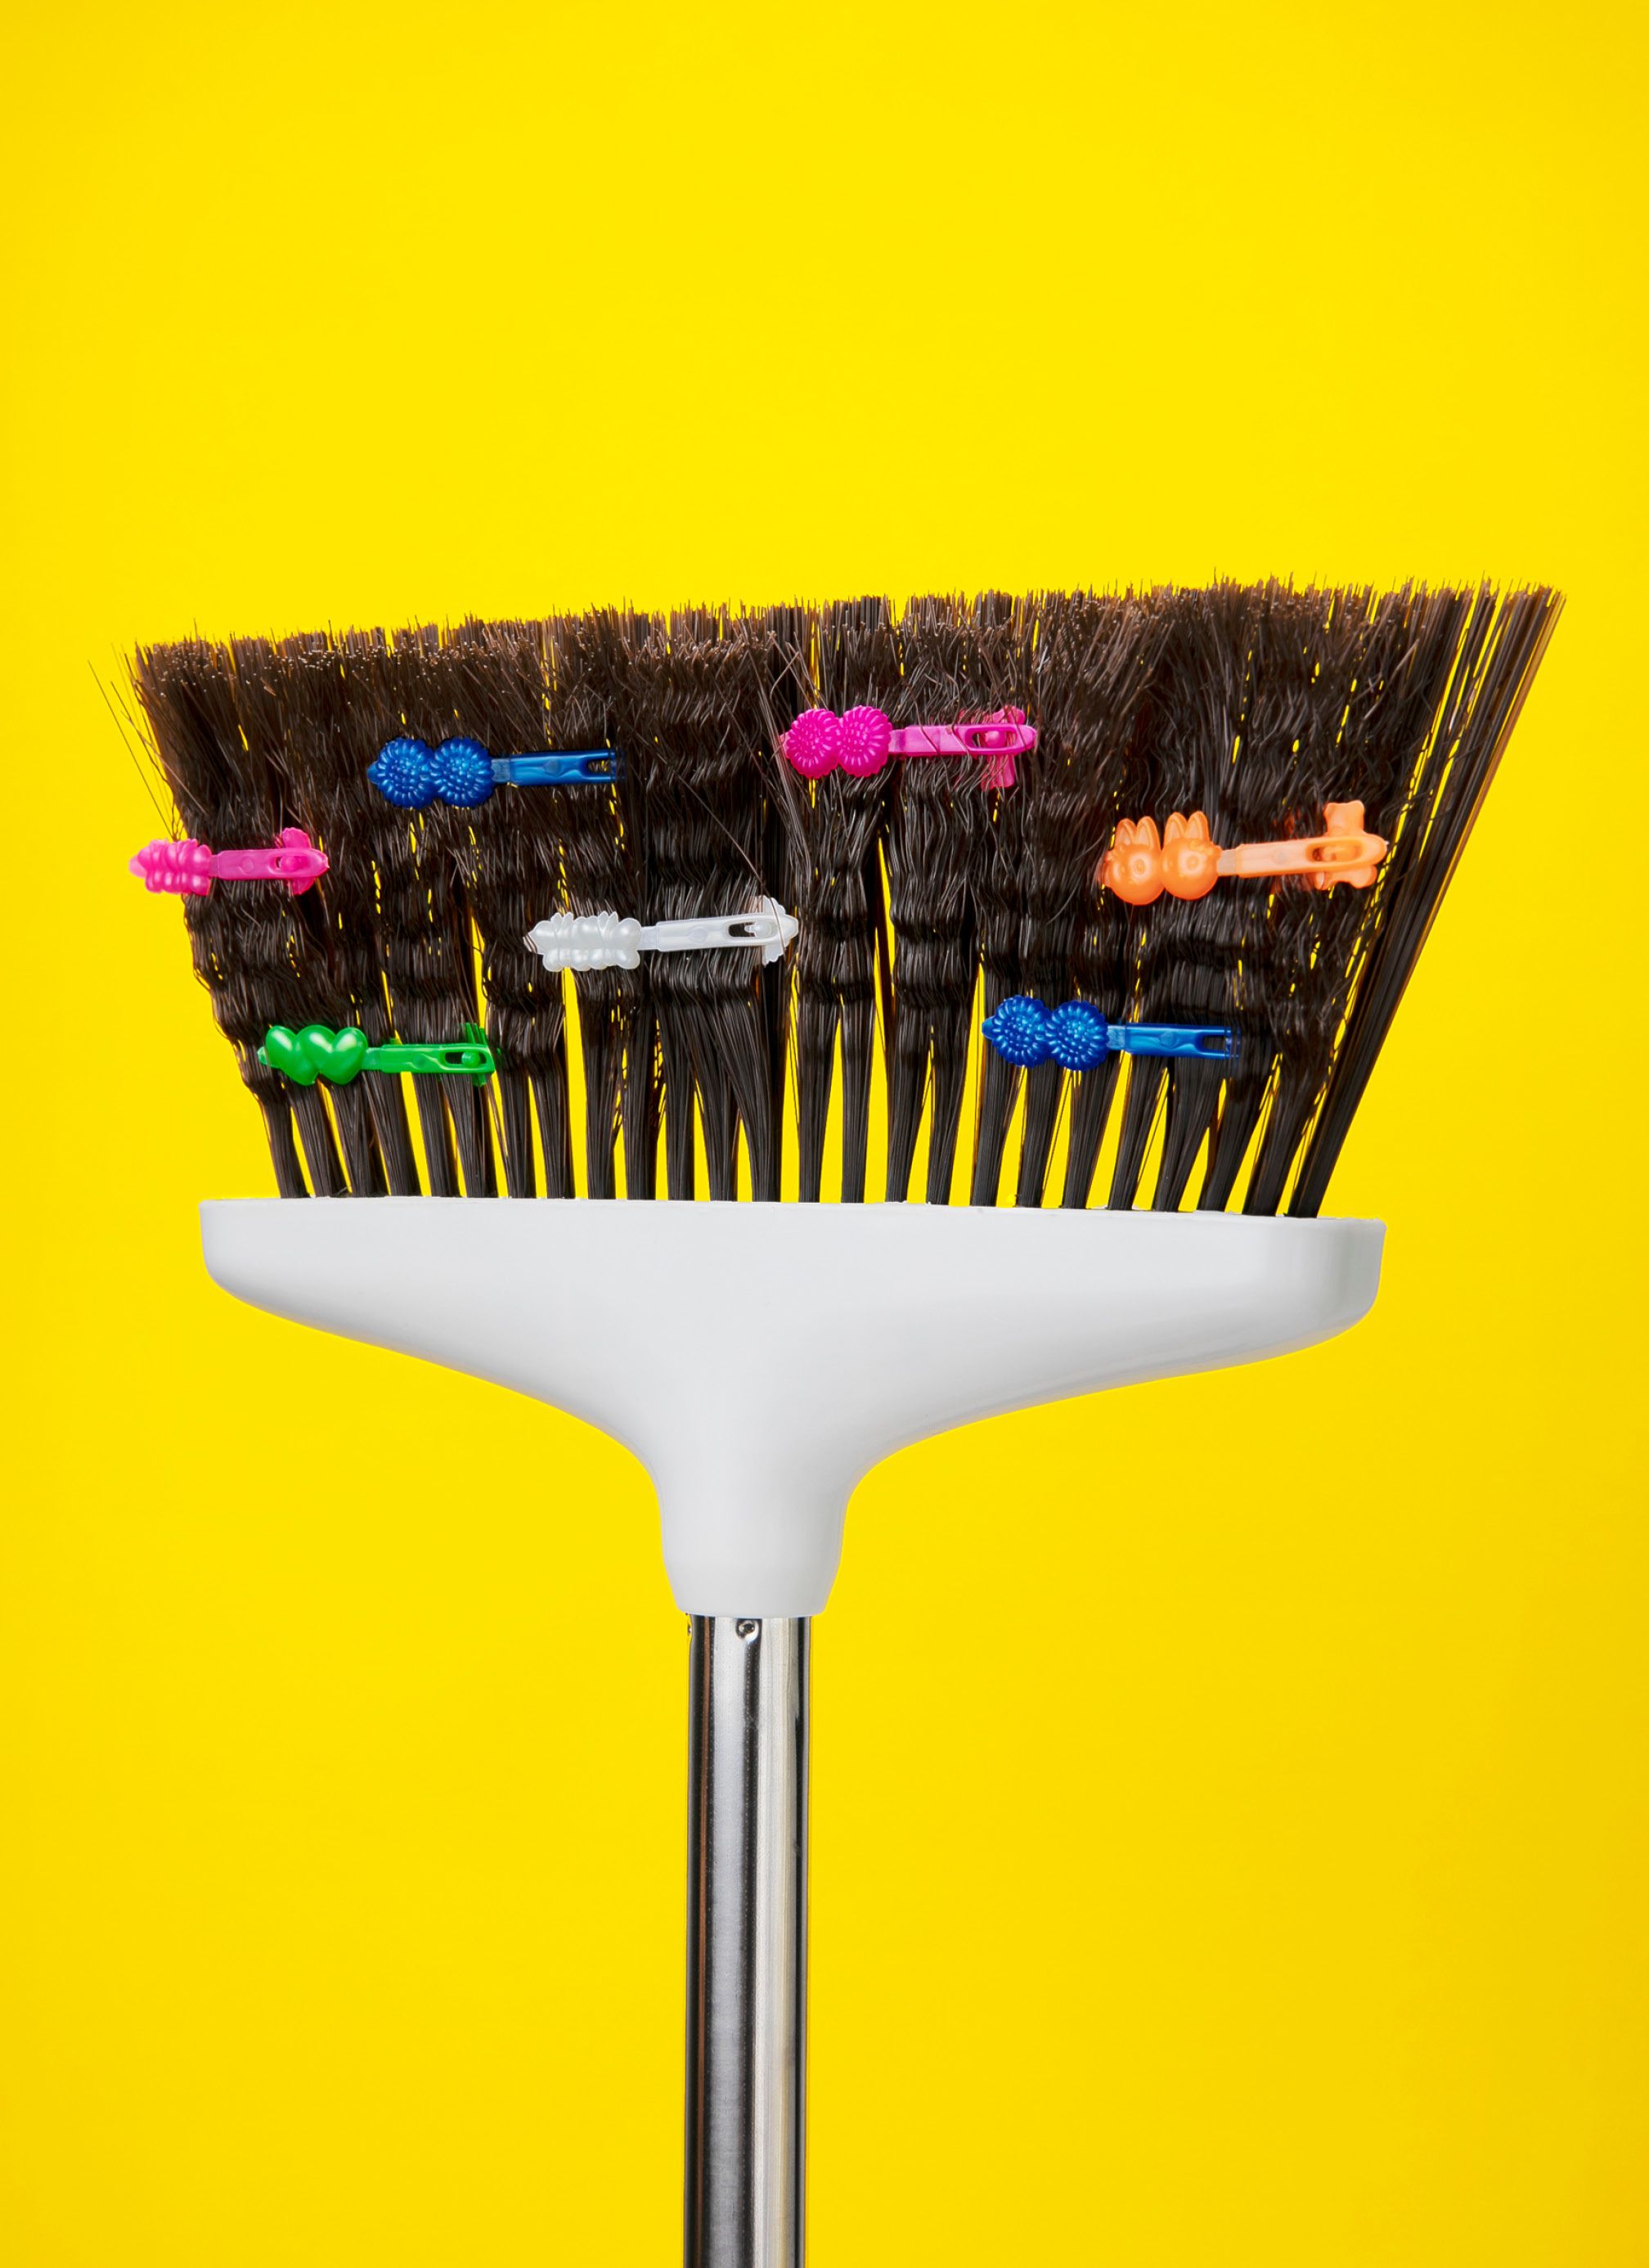 A broom with crimped bristles and colorful butterfly hair clips.